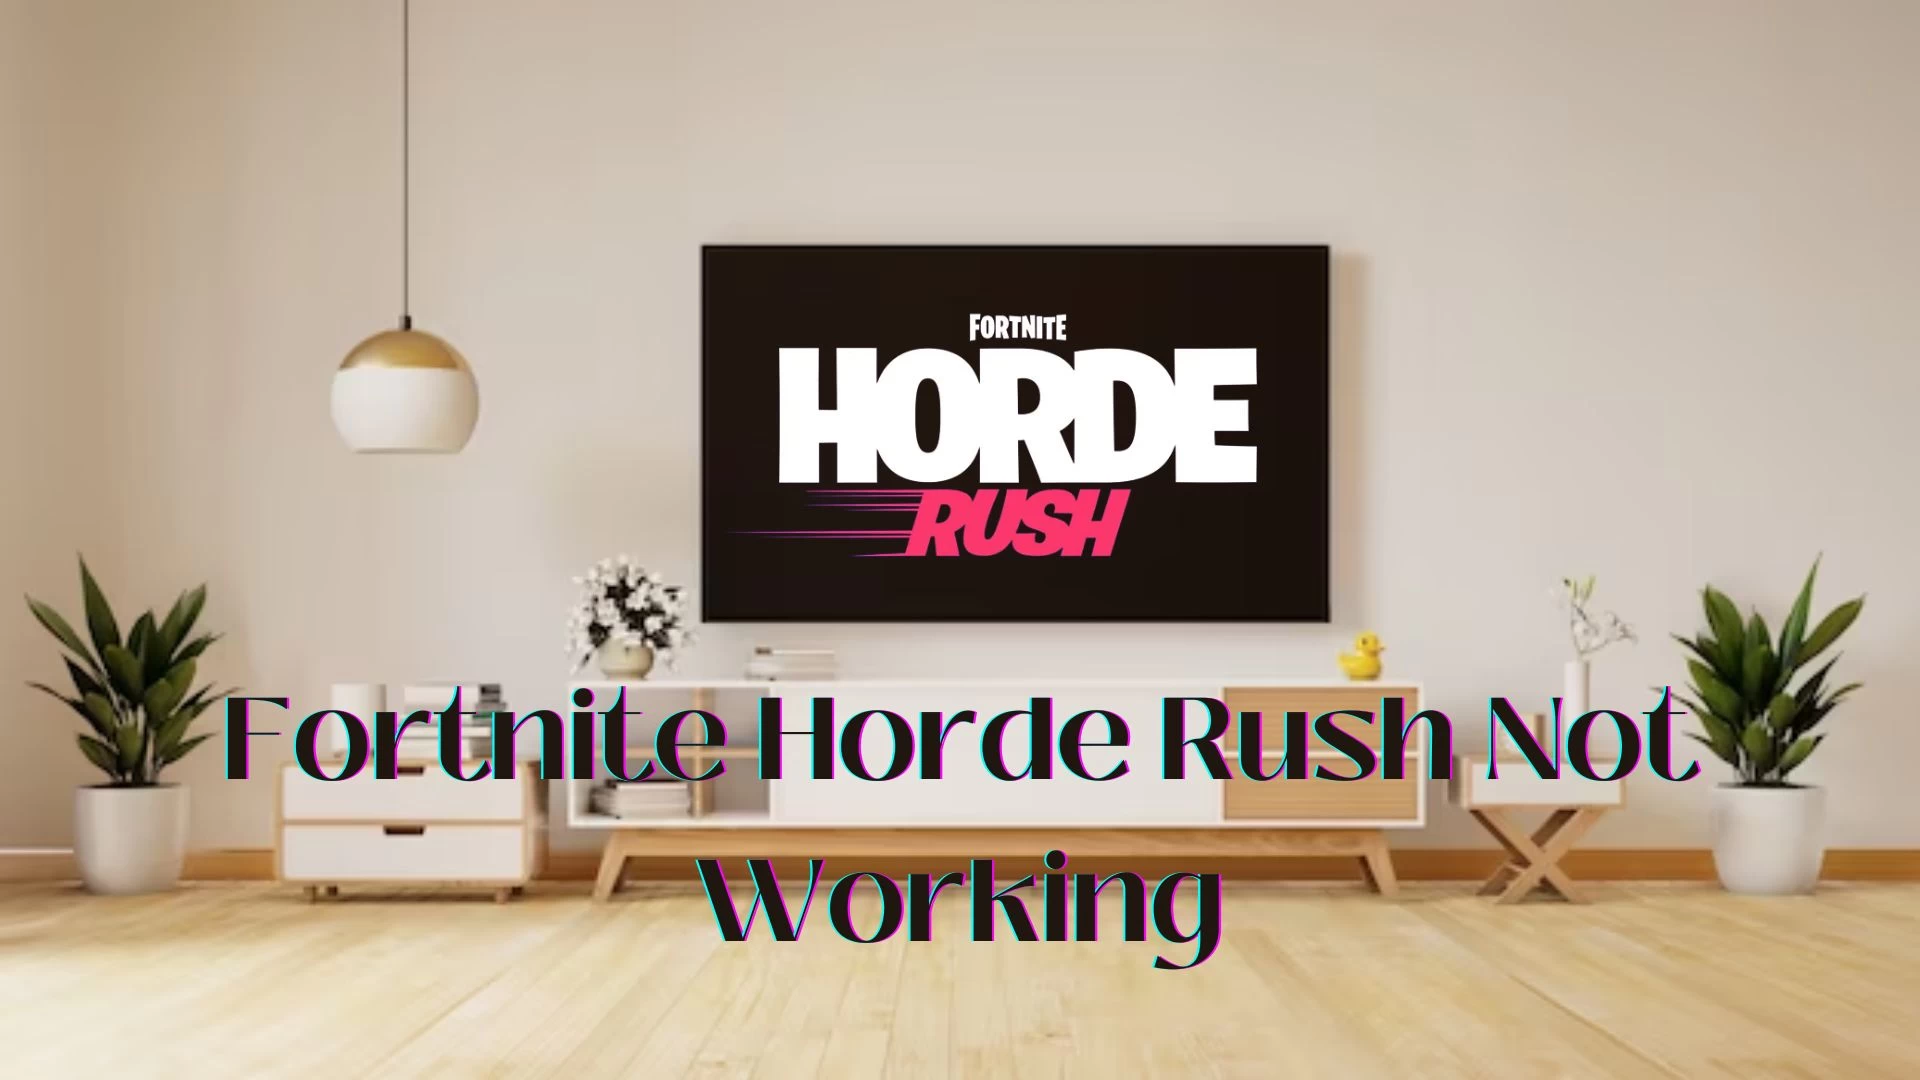 Fortnite Horde Rush Not Working, How to Fix Fortnite Horde Rush Not Working?